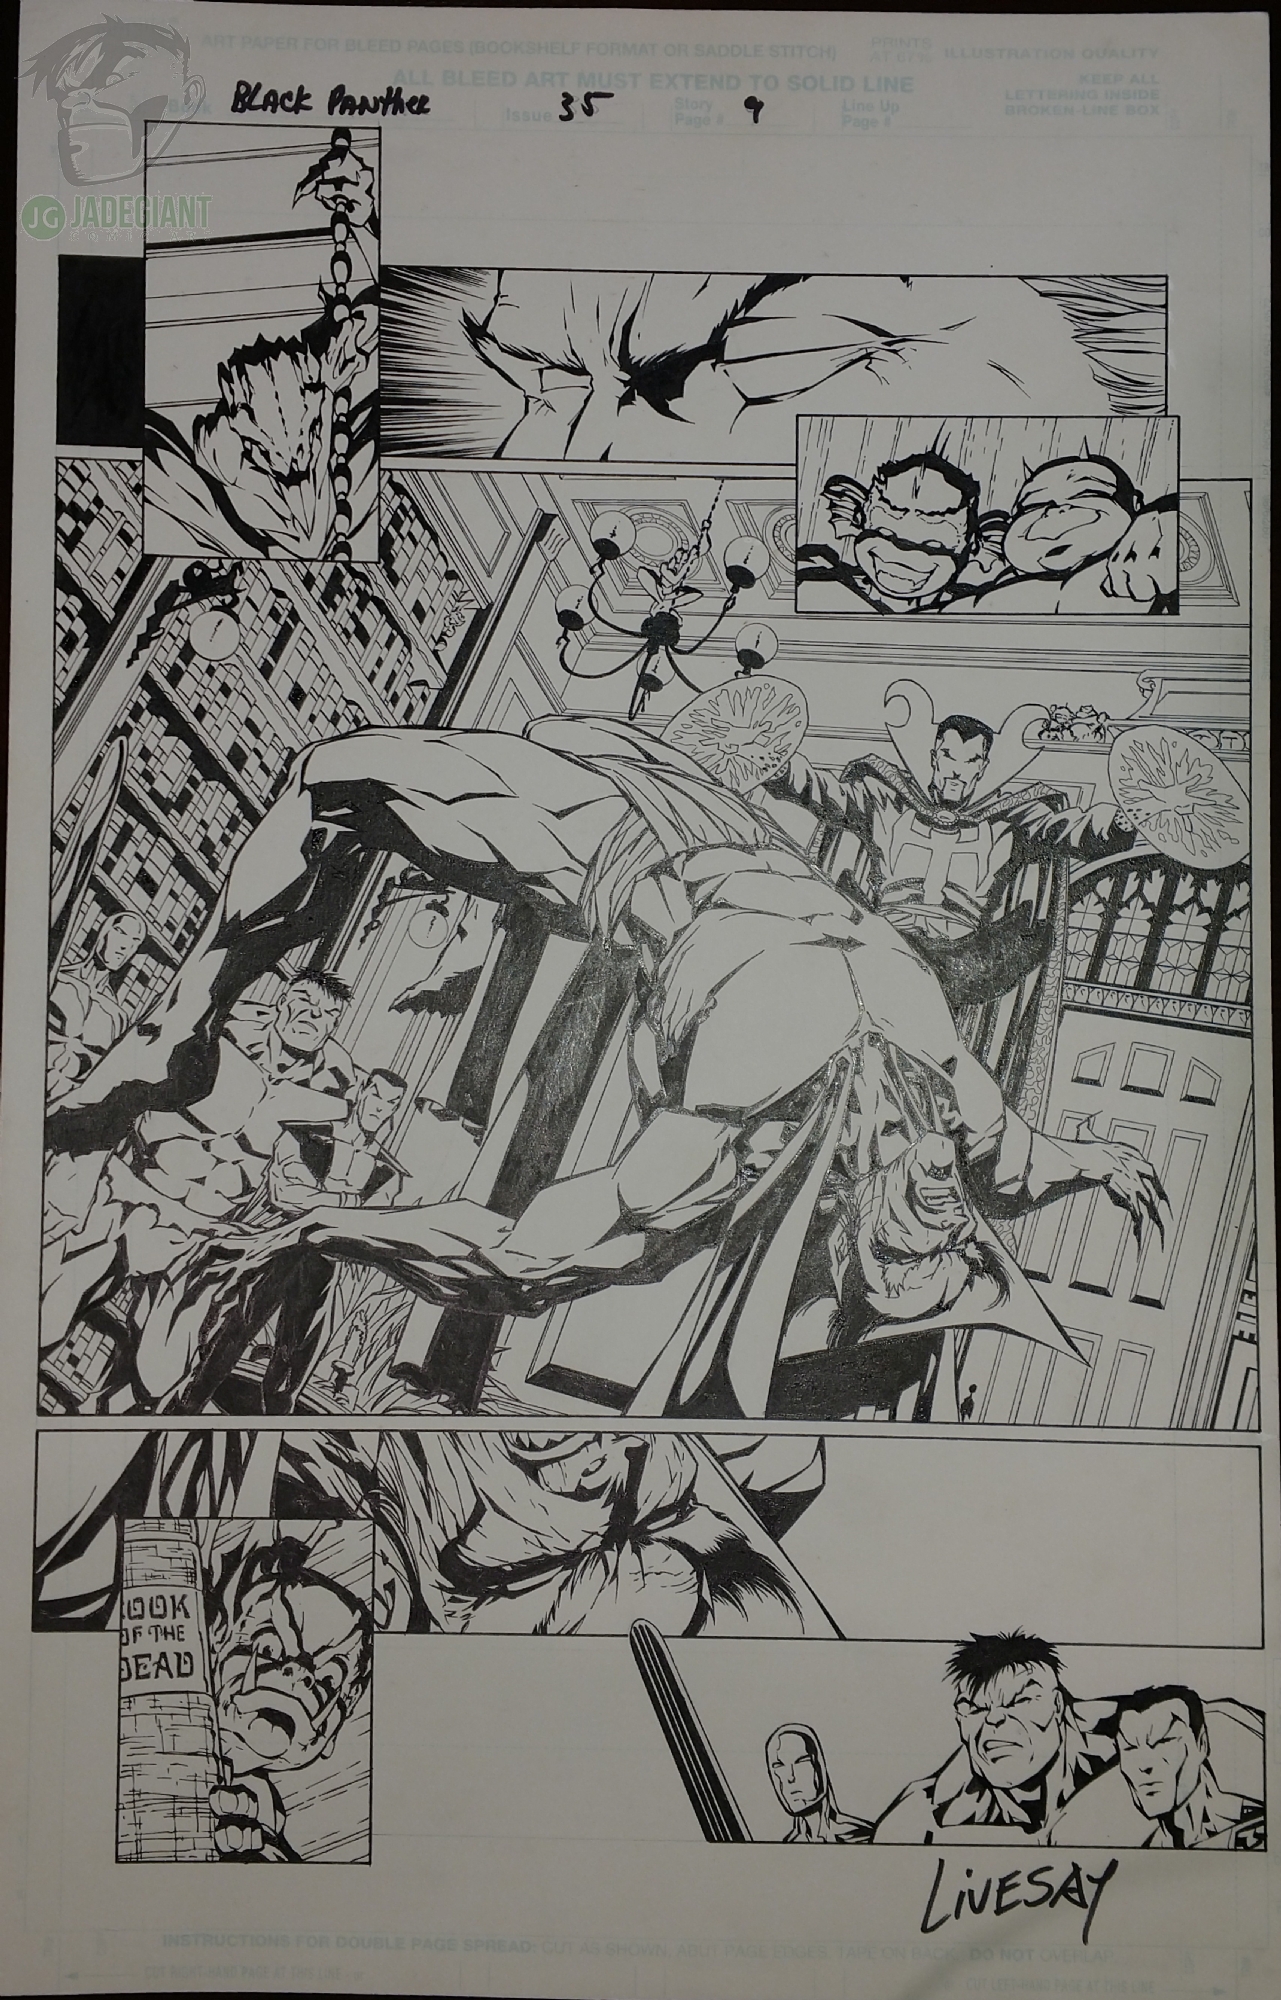 2001 Black Panther issue 35 page 9 with the Hulk and Defenders Comic Art